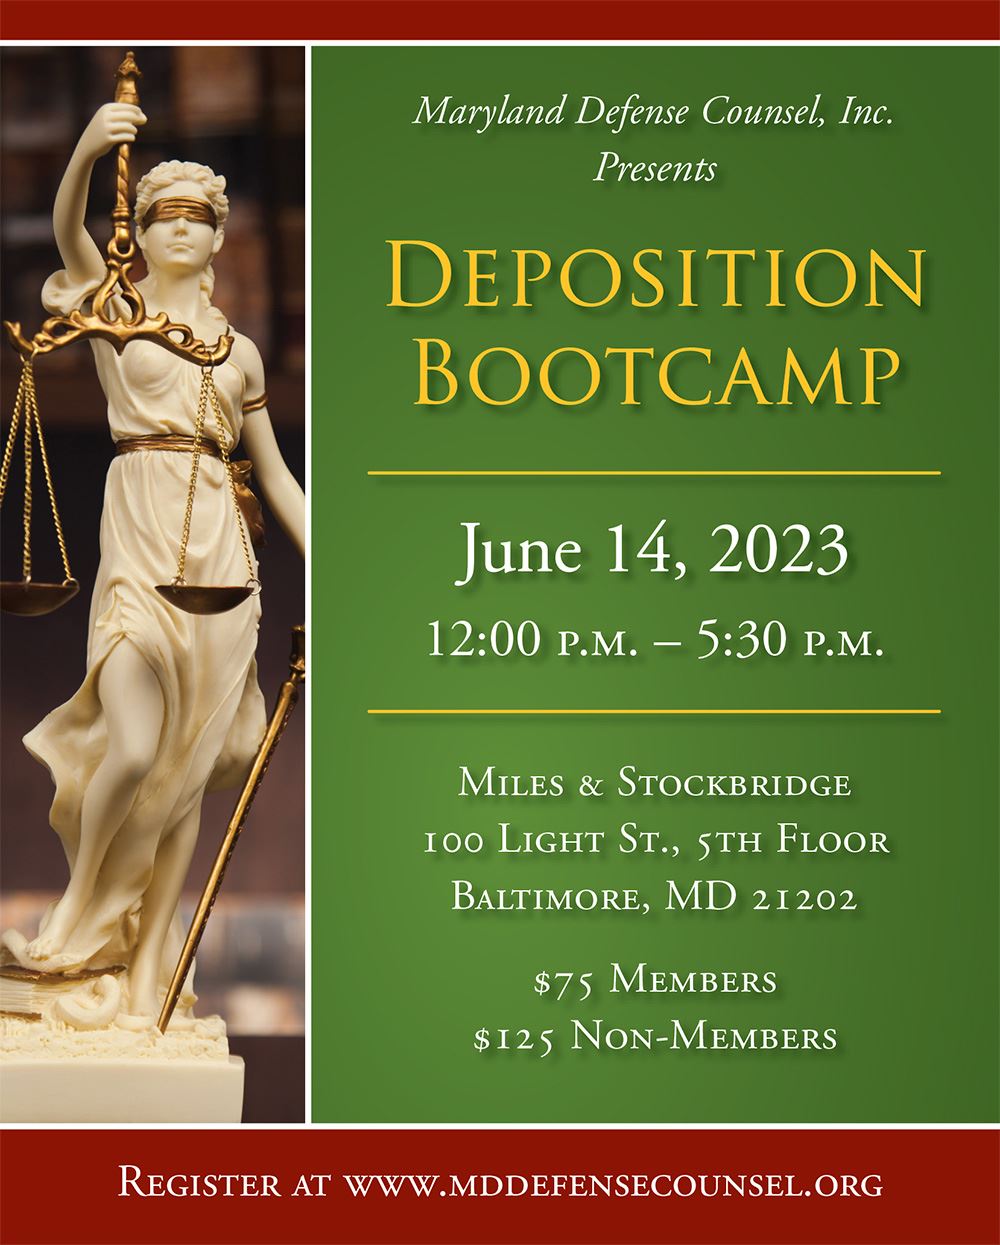 MDC Presents: Deposition Bootcamp, June 14, 2023, 12pm to 5:30pm